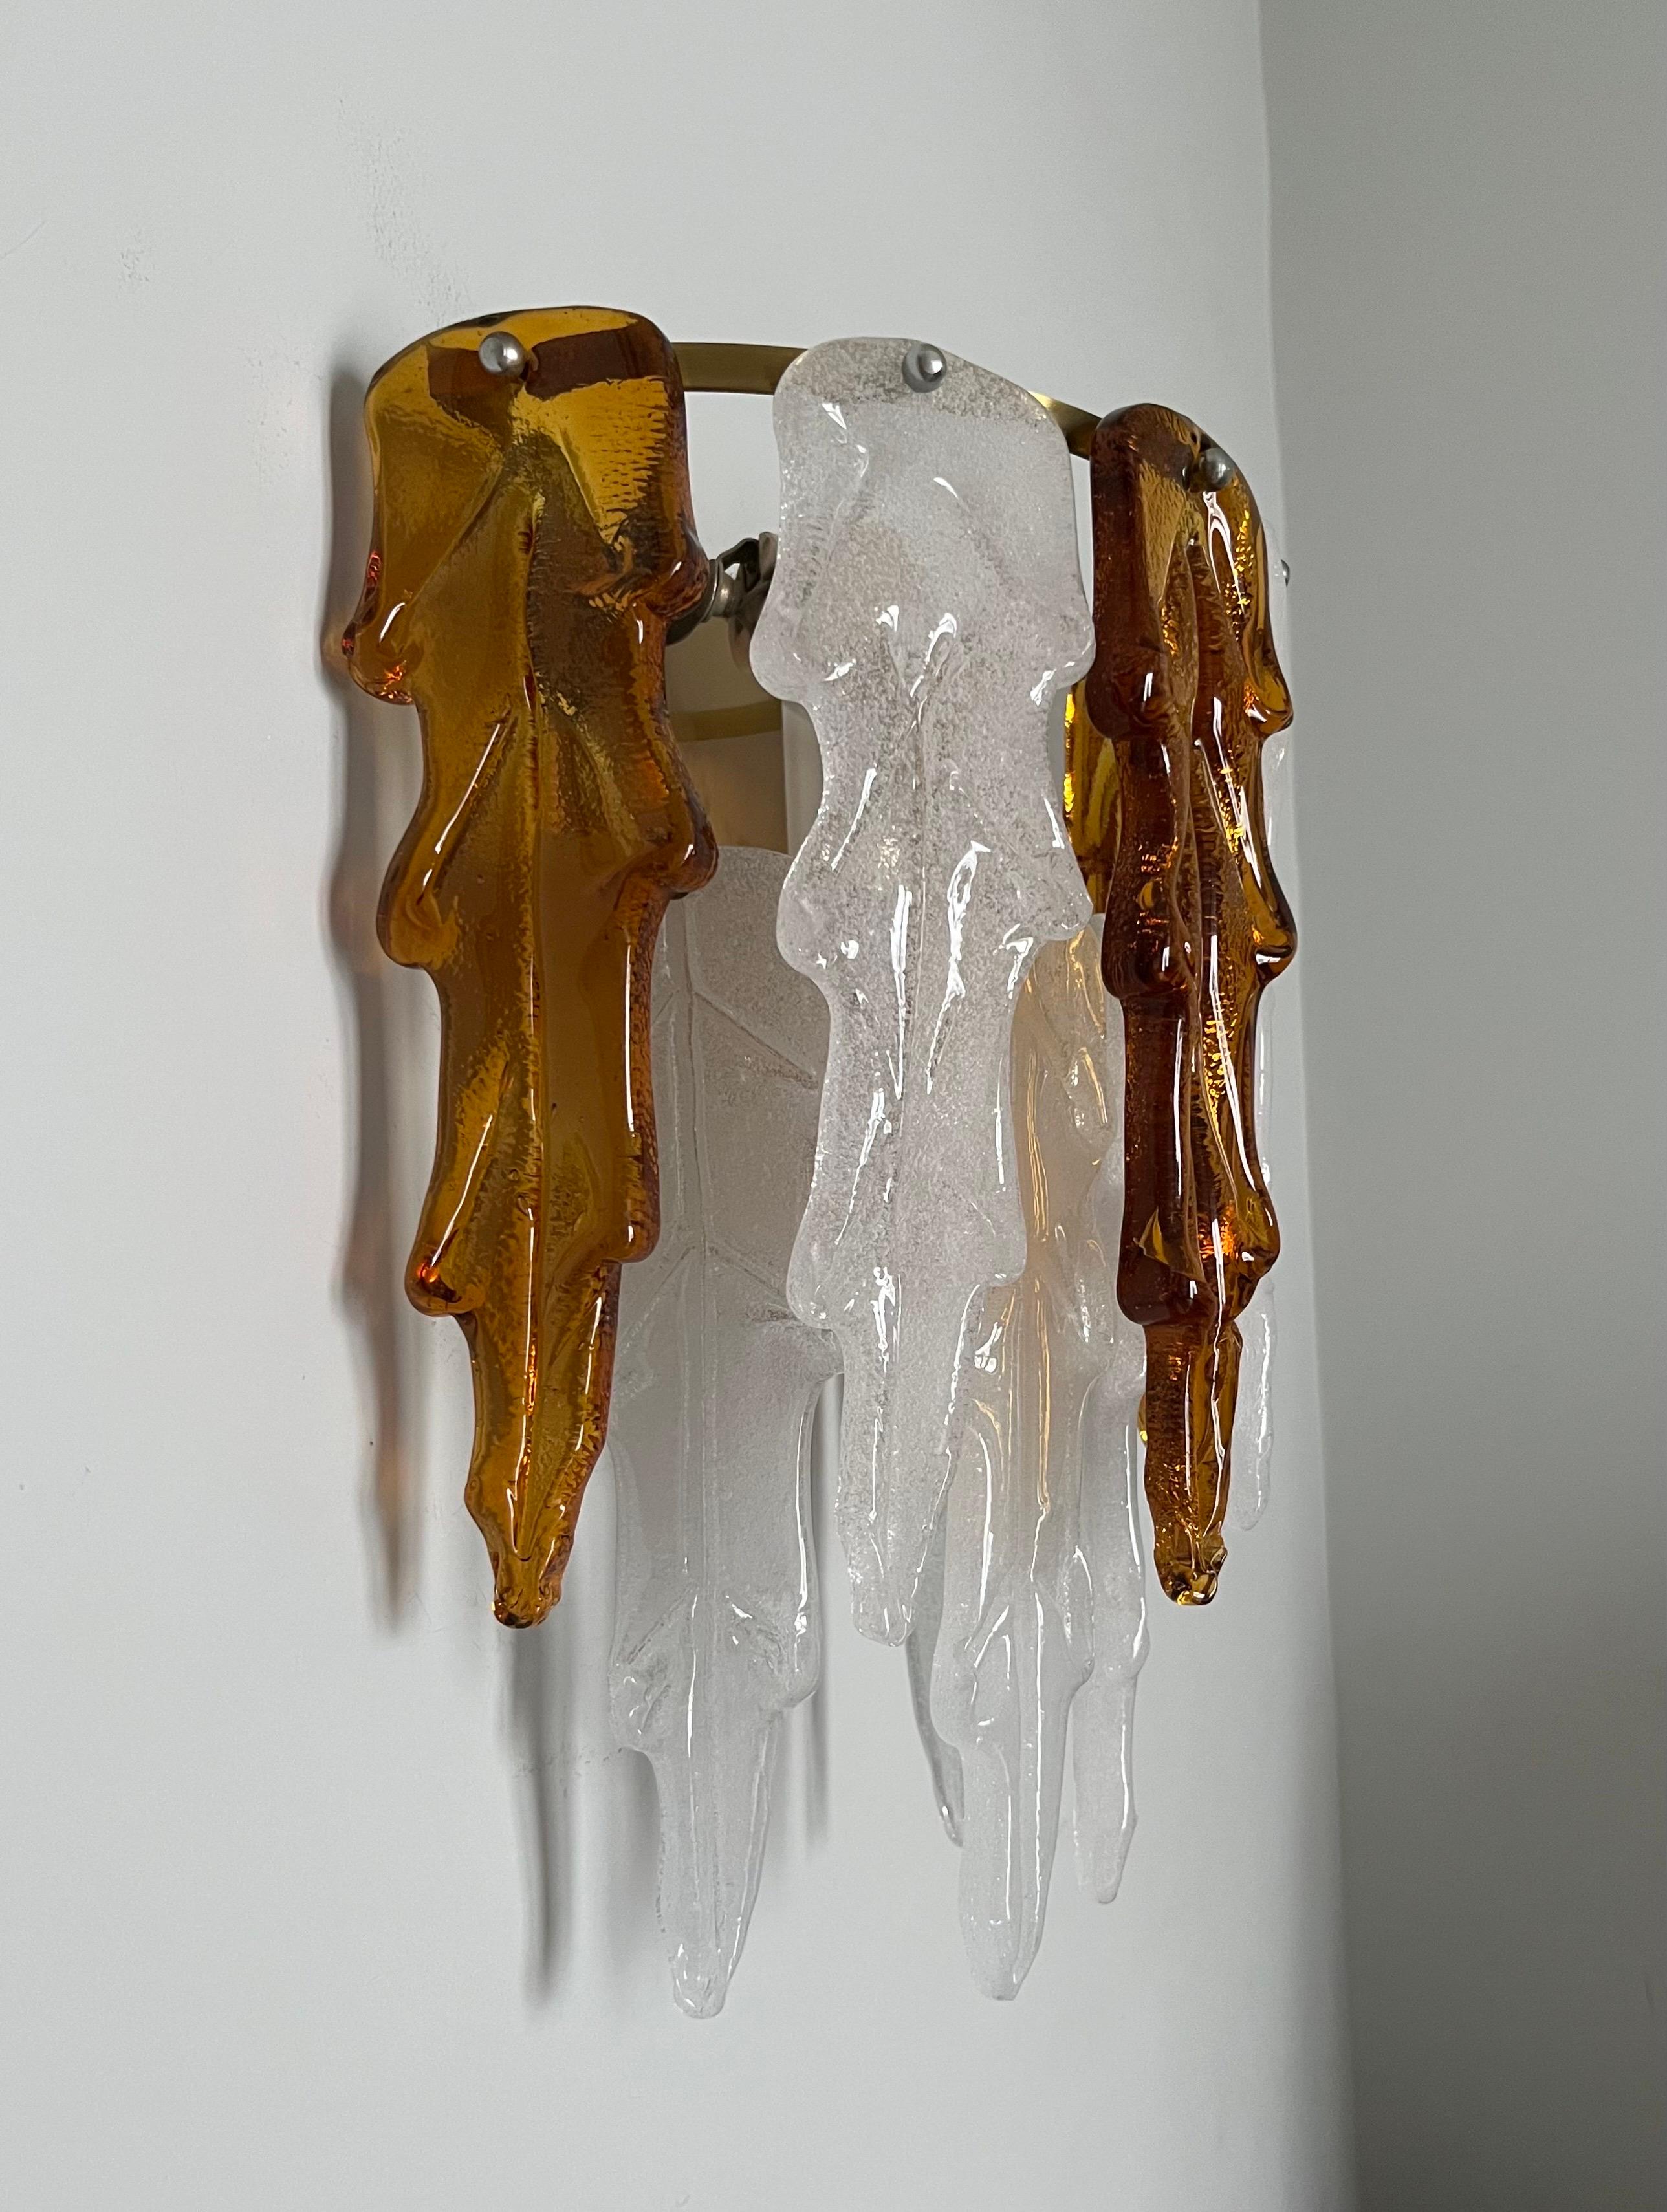 Unique, beauty and large Pair of Italian white amber Murano glass wall sconces from 1970s.
These wall sconces were made during the 1970s in Italy for the Venice Company 